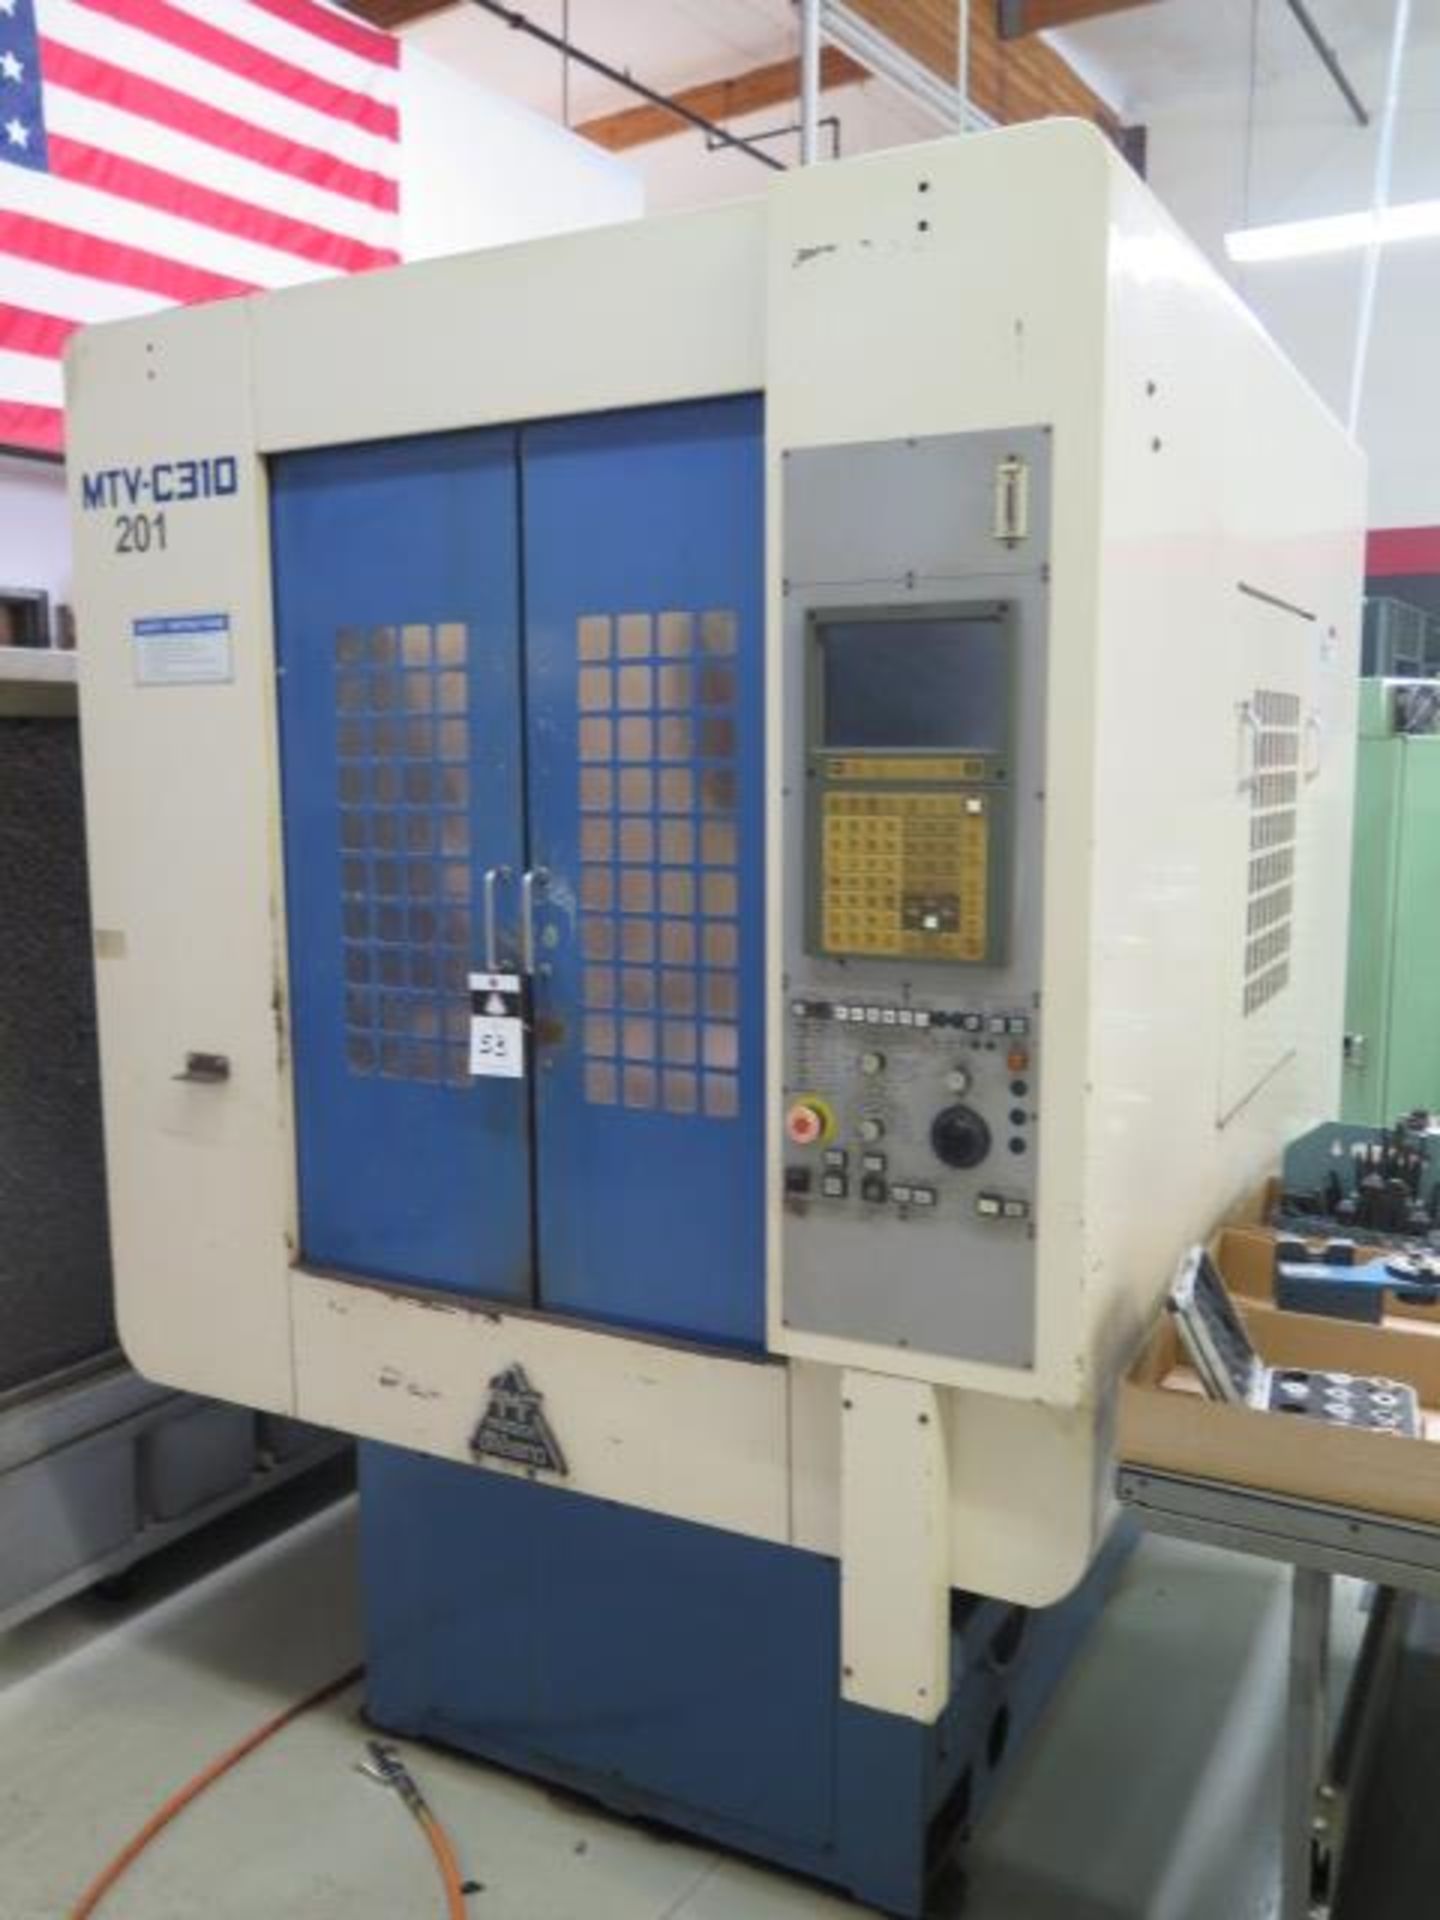 Mectron /Miyano MTC-C310 2-Pallet CNC Drilling / Tapping Center s/n MTVC3100132 w/ Yasnac,SOLD AS IS - Image 2 of 16